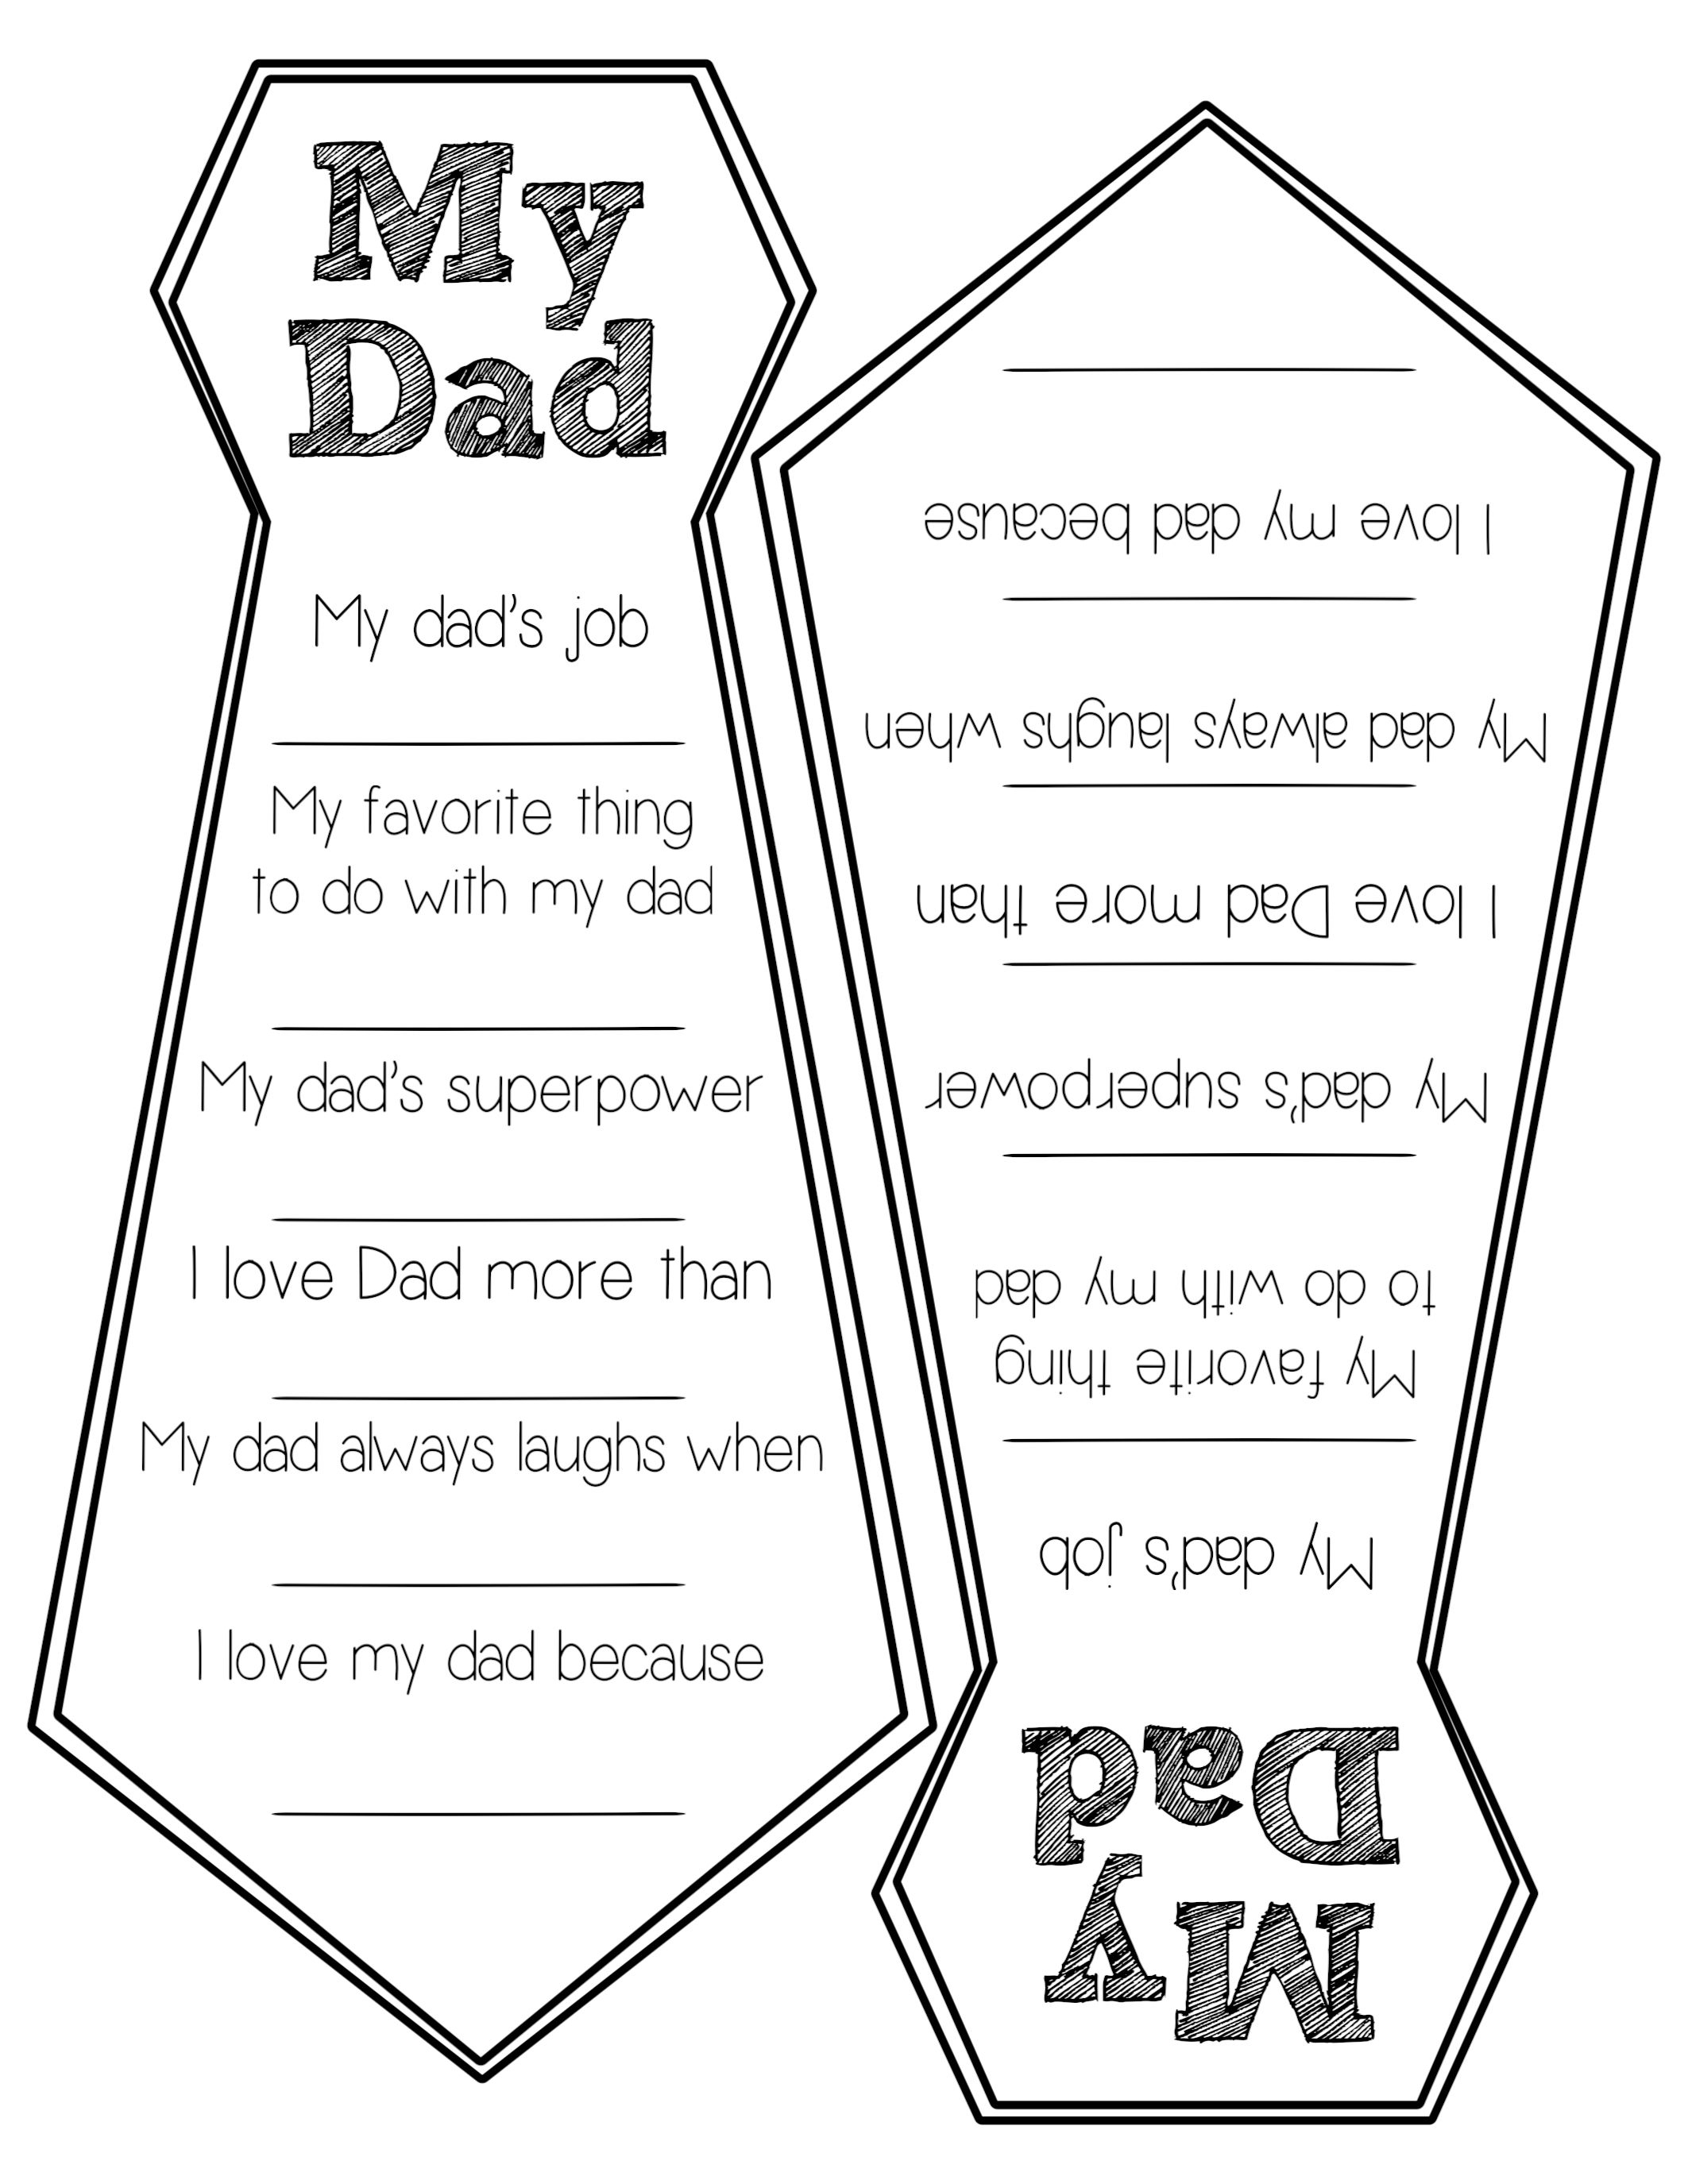 Father&amp;#039;s Day Free Printable Cards. Diy Father&amp;#039;s Day Fill In Cards - Hallmark Free Printable Fathers Day Cards